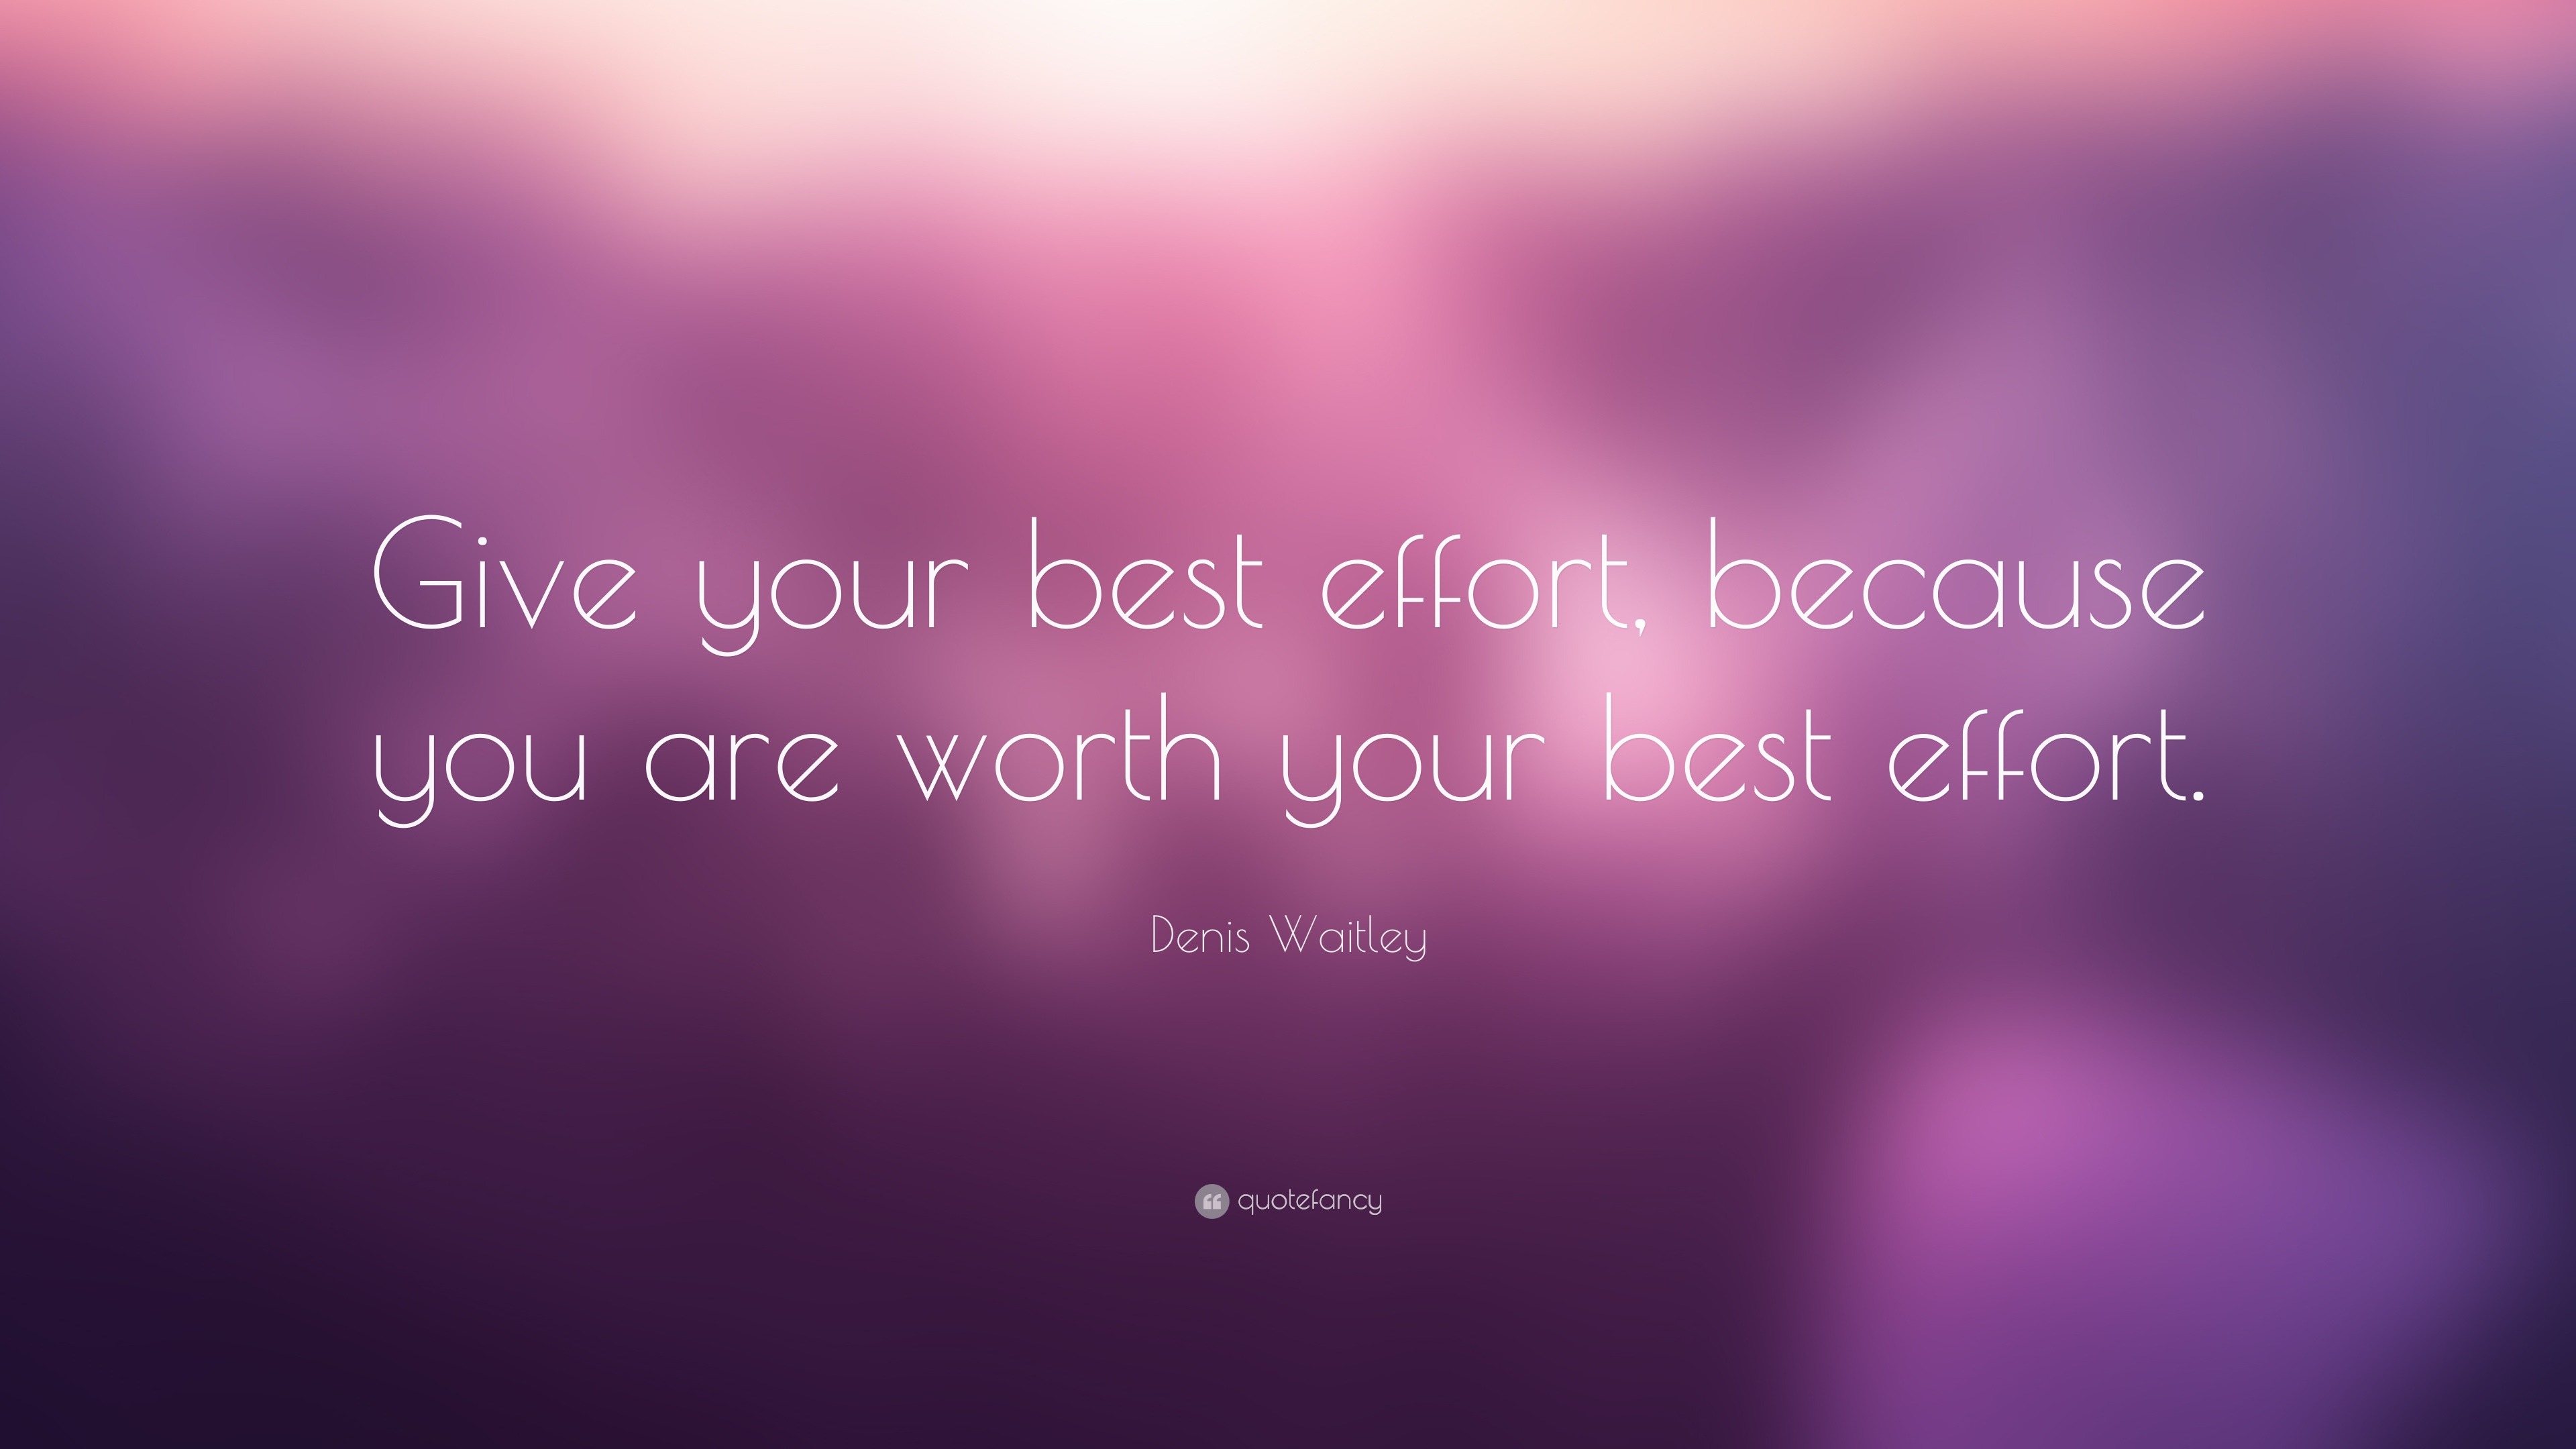 Denis Waitley Quote “Give your best effort, because you